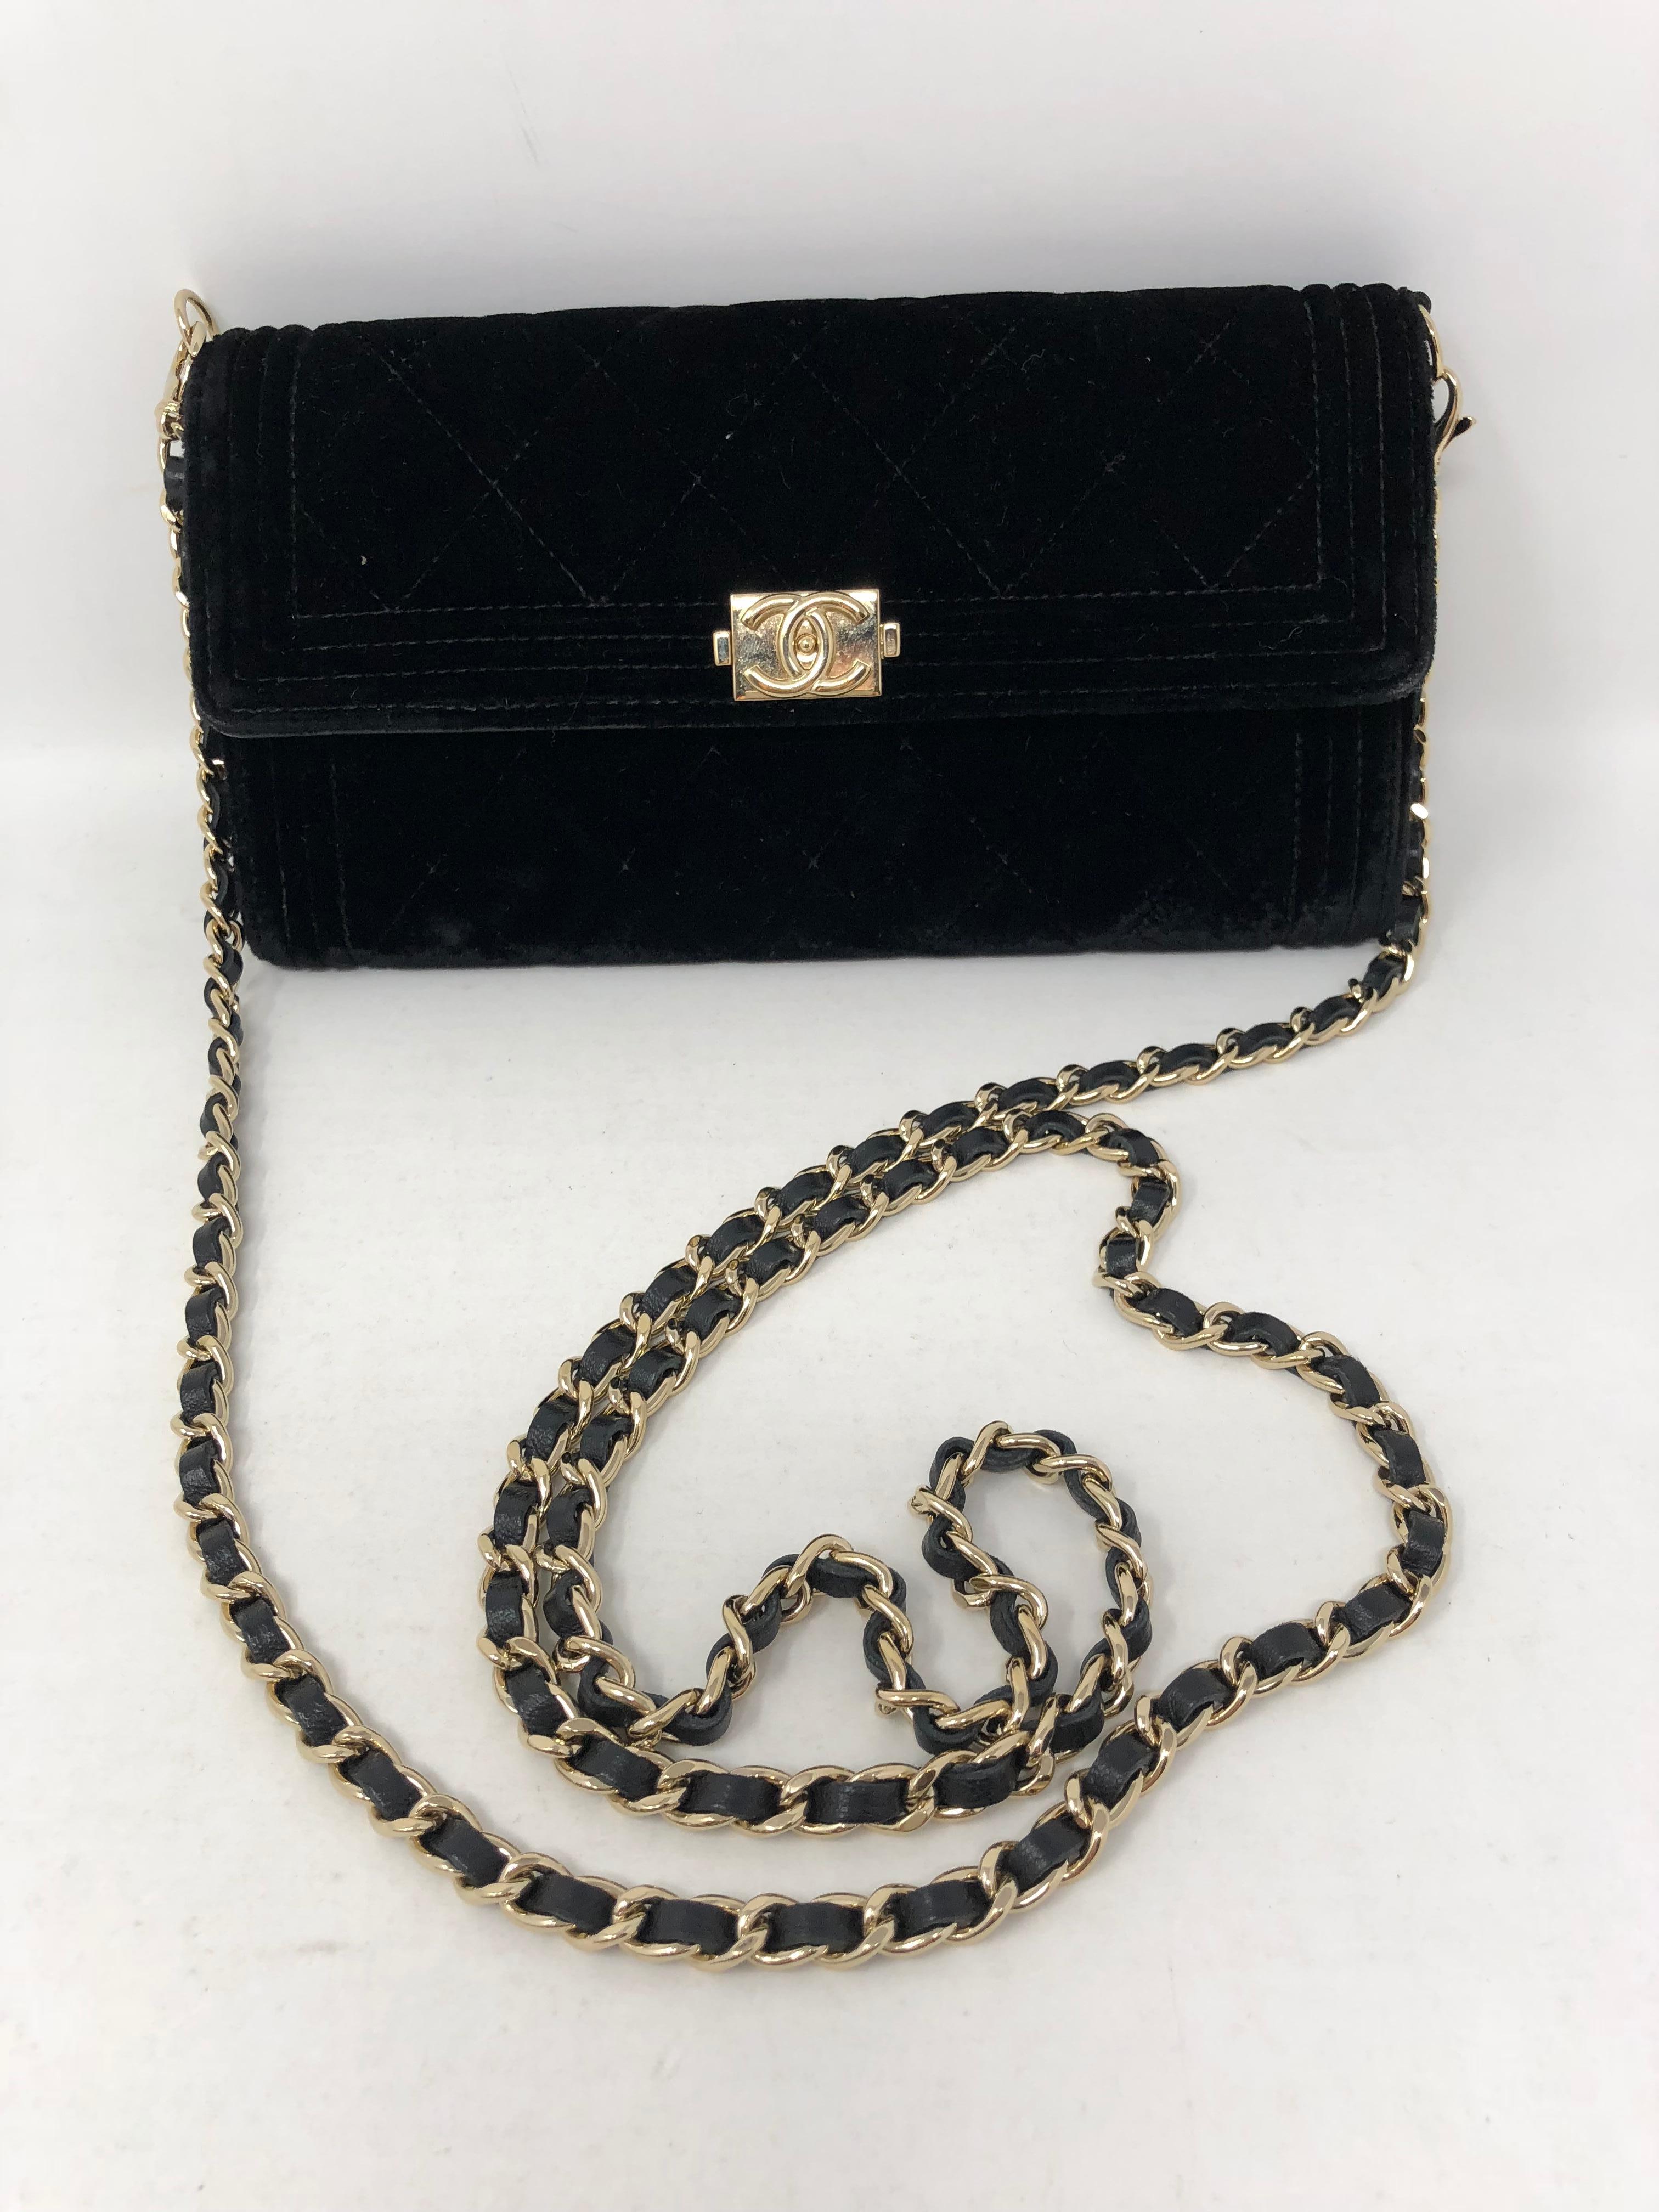 Chanel Black Velvet Crossbody/ Clutch with gold hardware. Excellent condition. Strap is removable. Perfect evening bag or use even as a wallet. Similar to a Wallet on a chain. Velvet exterior. Own this beauty. Guaranteed authentic. 